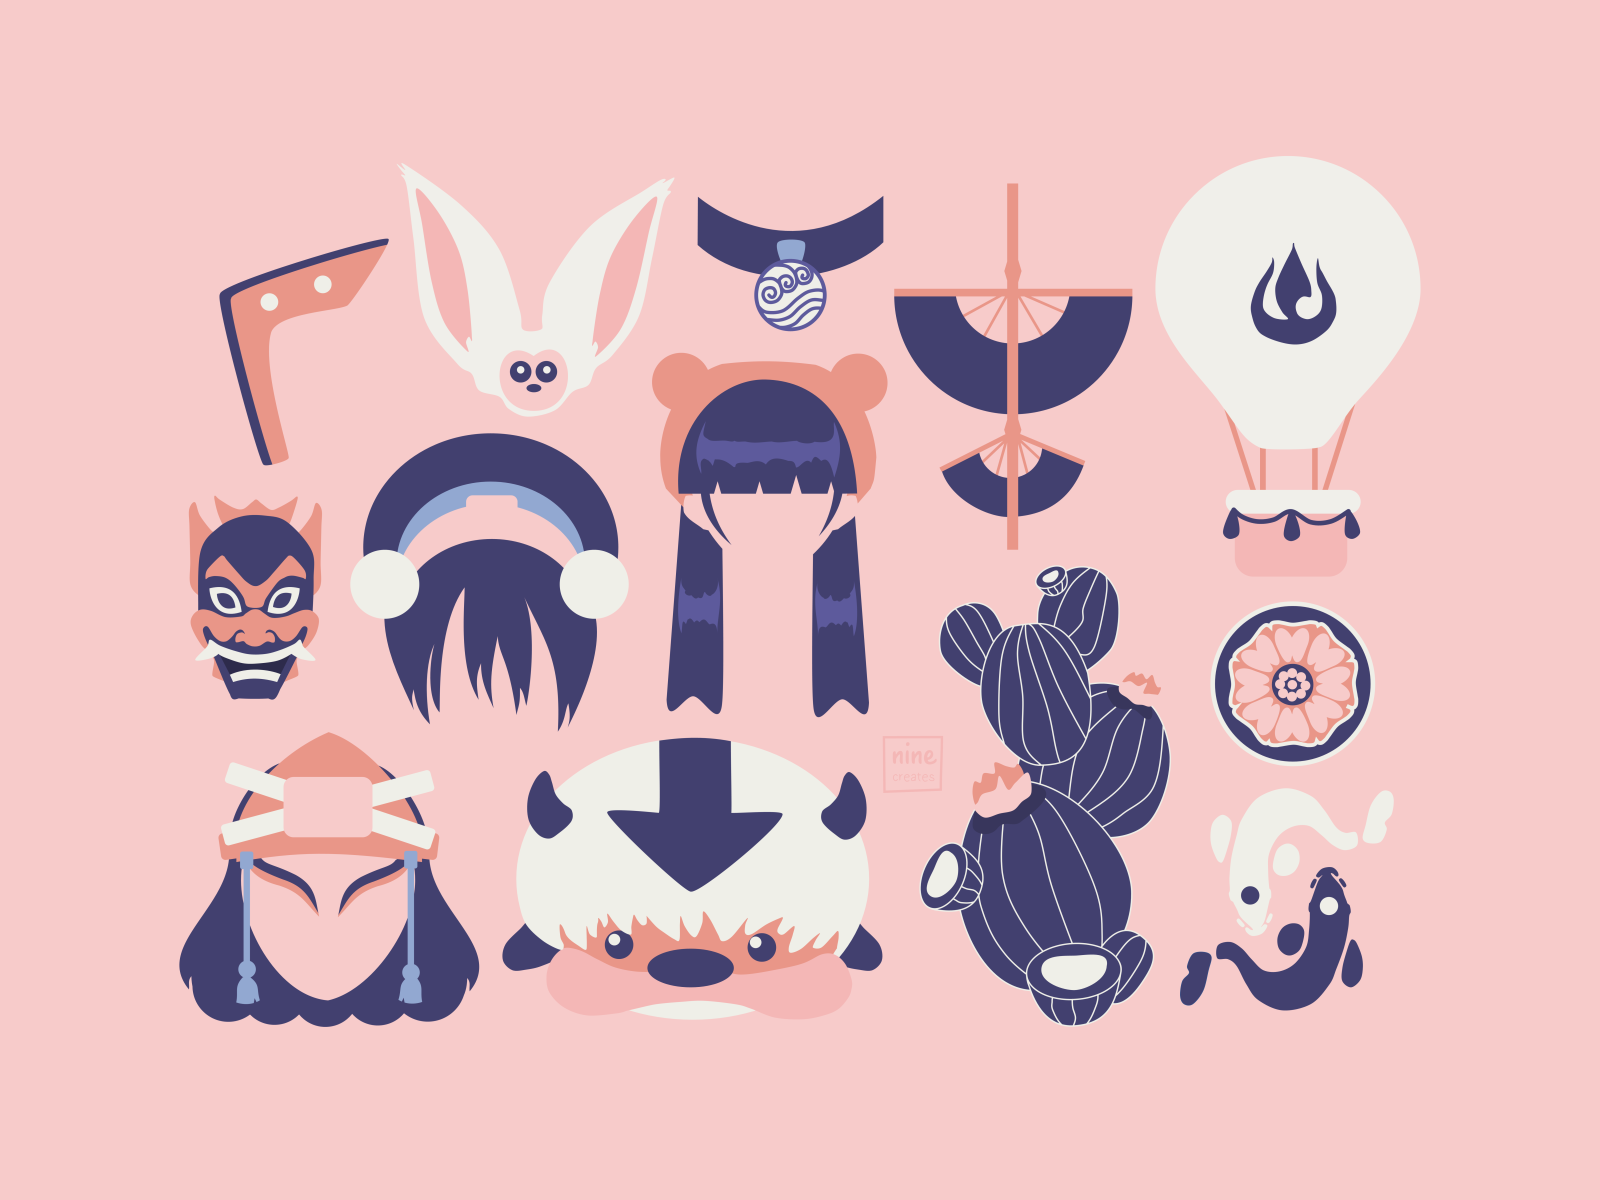 Avatar: The Last Airbender Icon Pack by nine.creates on Dribbble